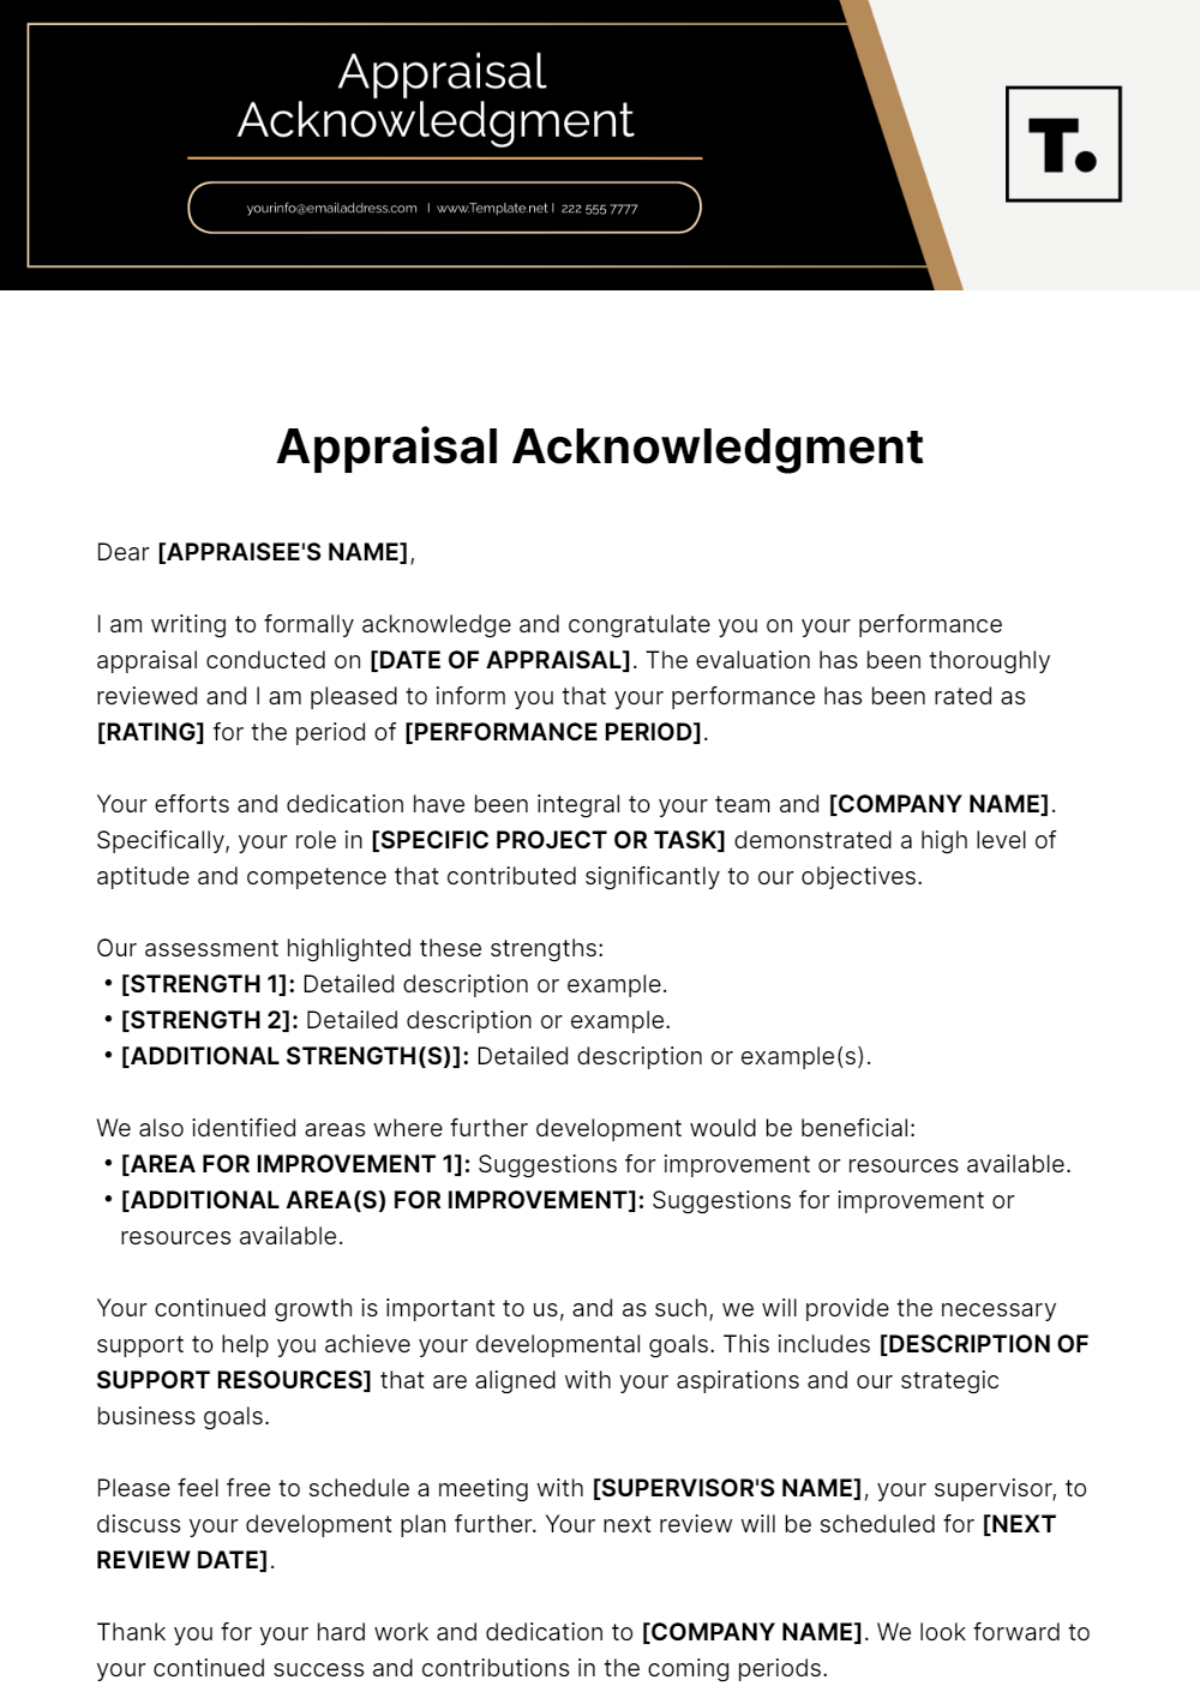 Appraisal Acknowledgment Template